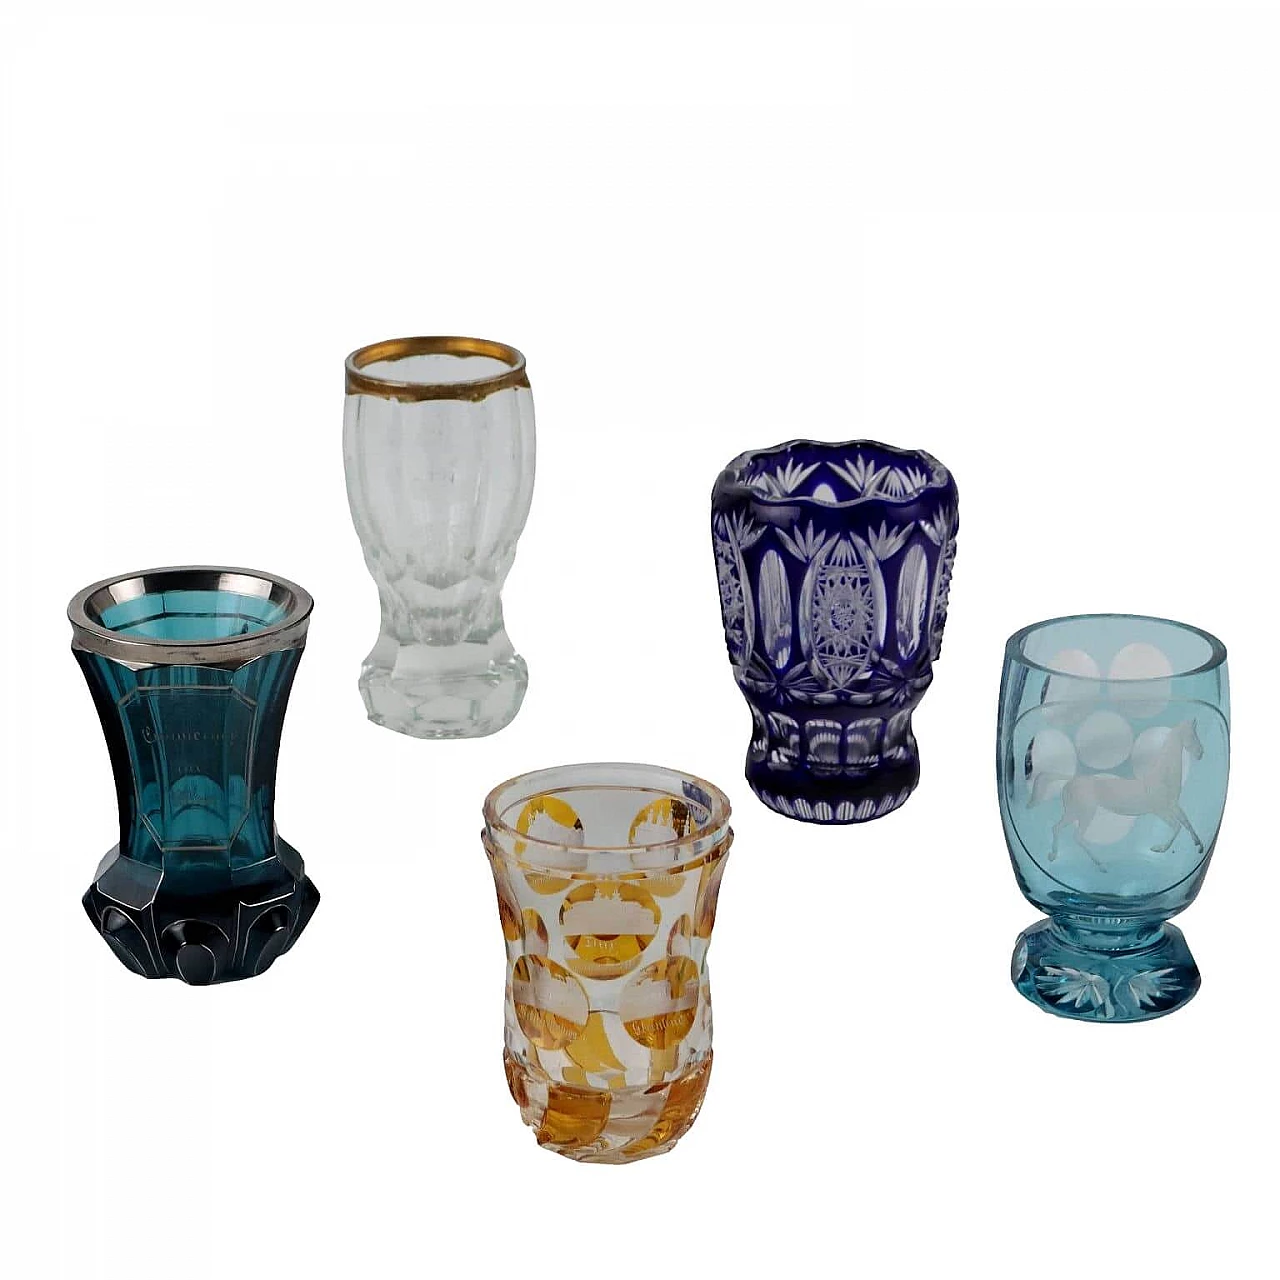 5 Beveled glass glasses of different shapes and colors 1